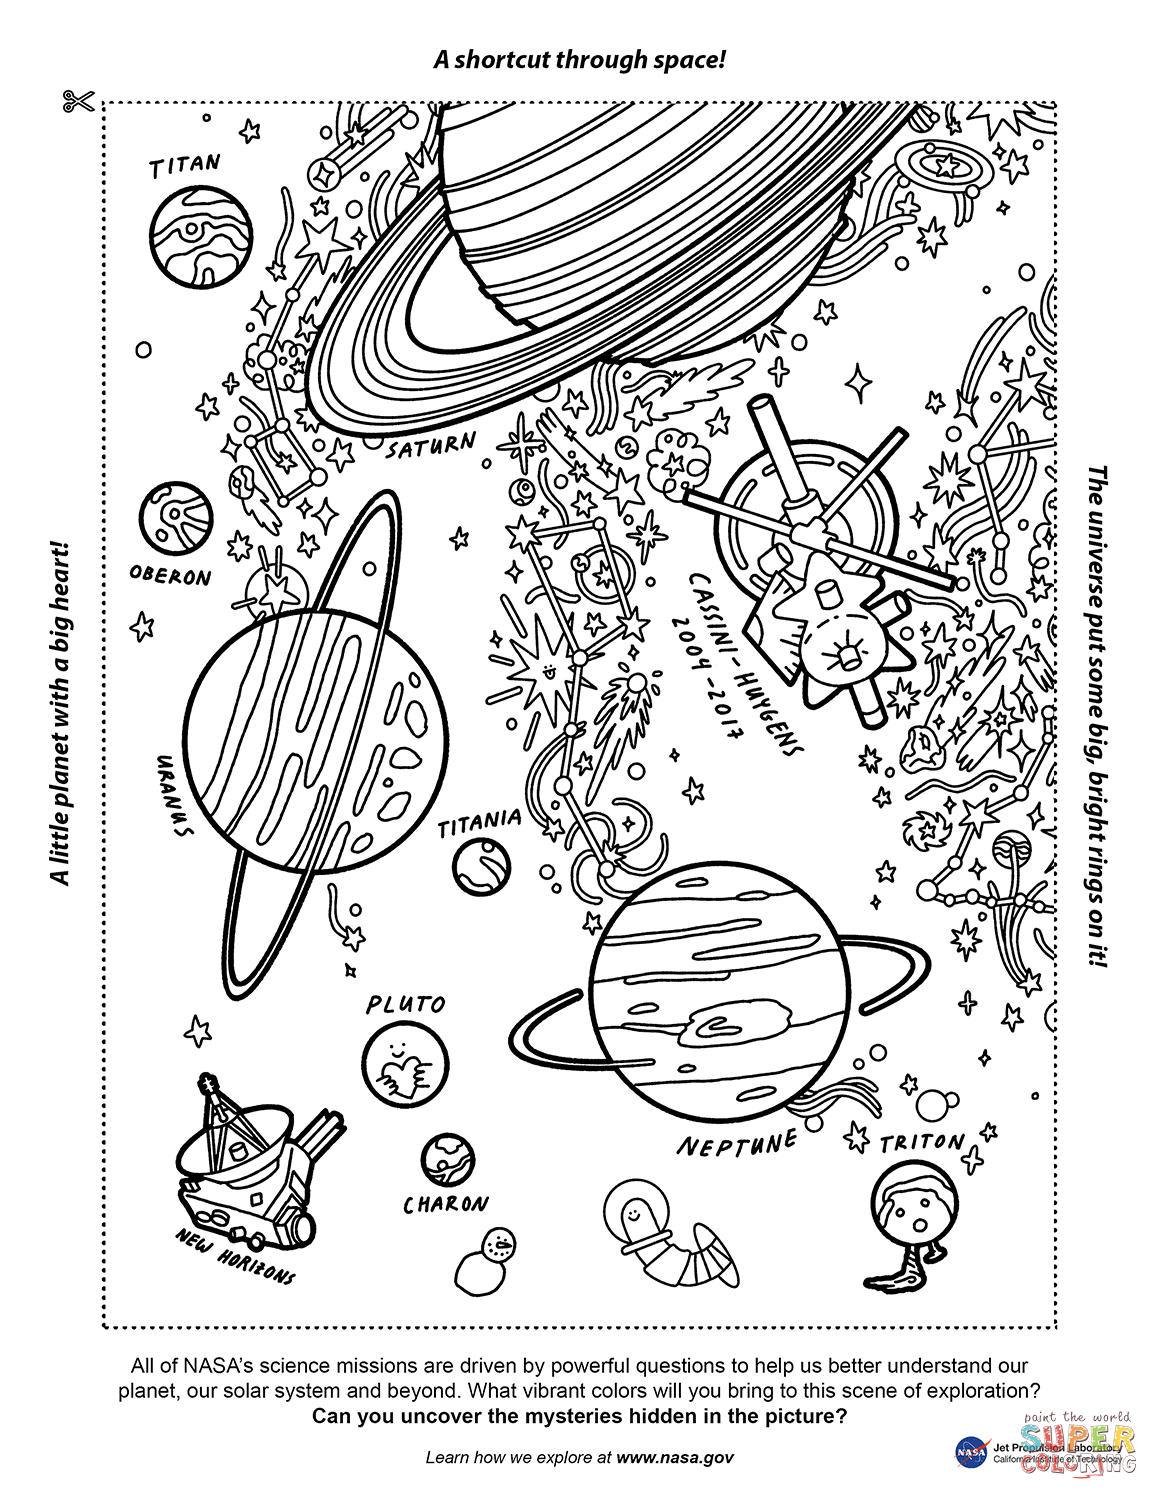 A shortcut through space coloring page free printable coloring pages